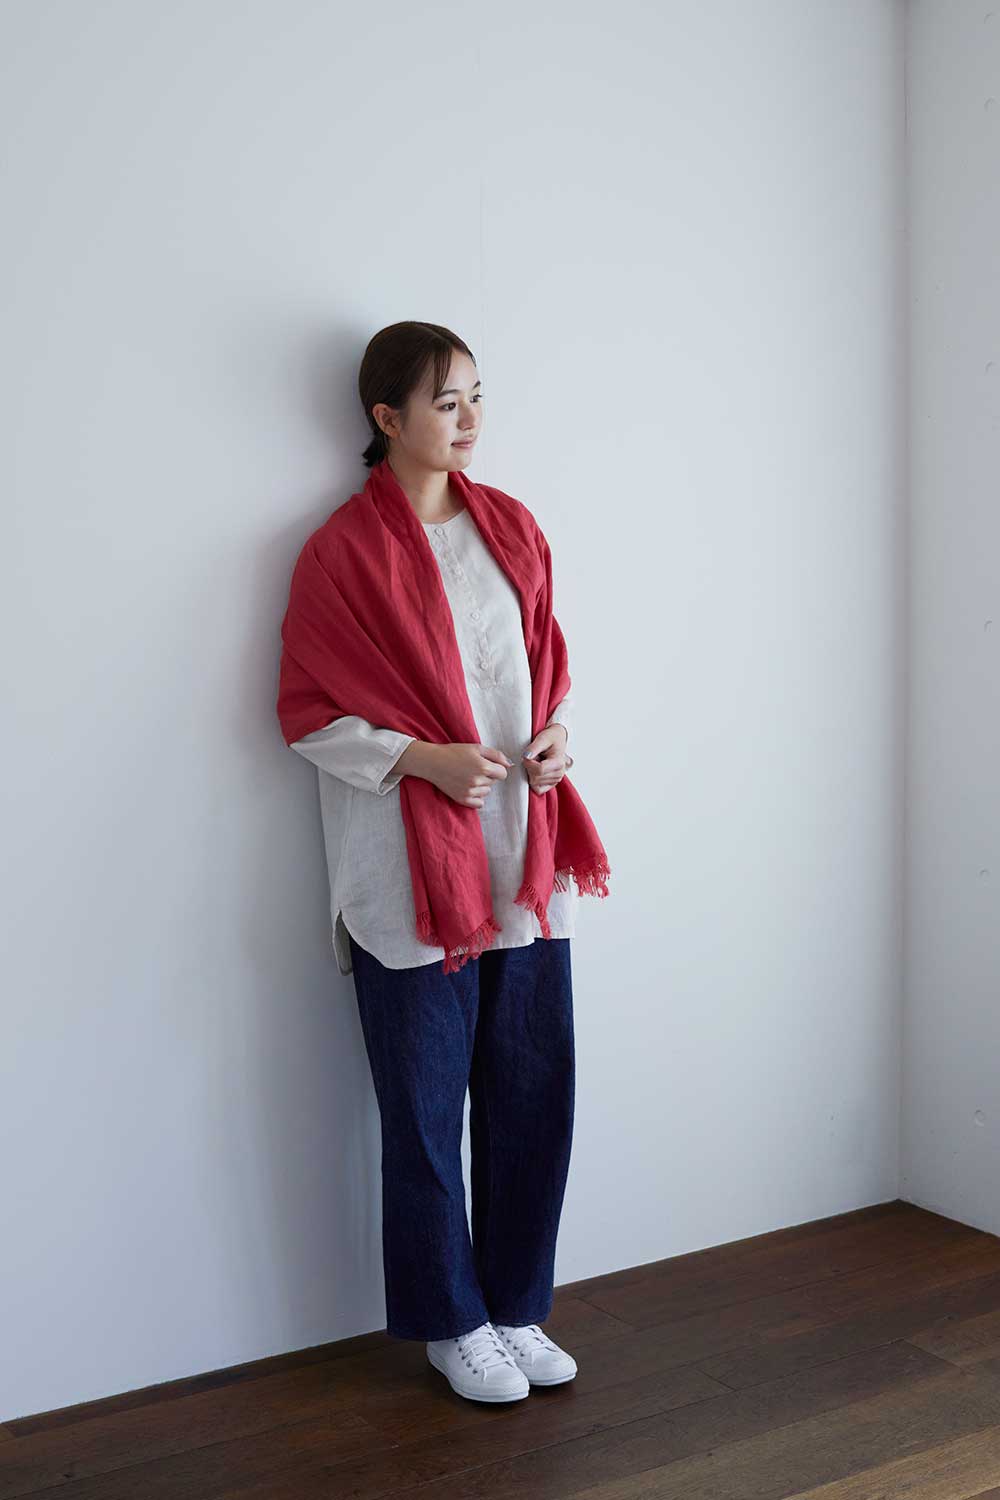 roserie scarf: red rose